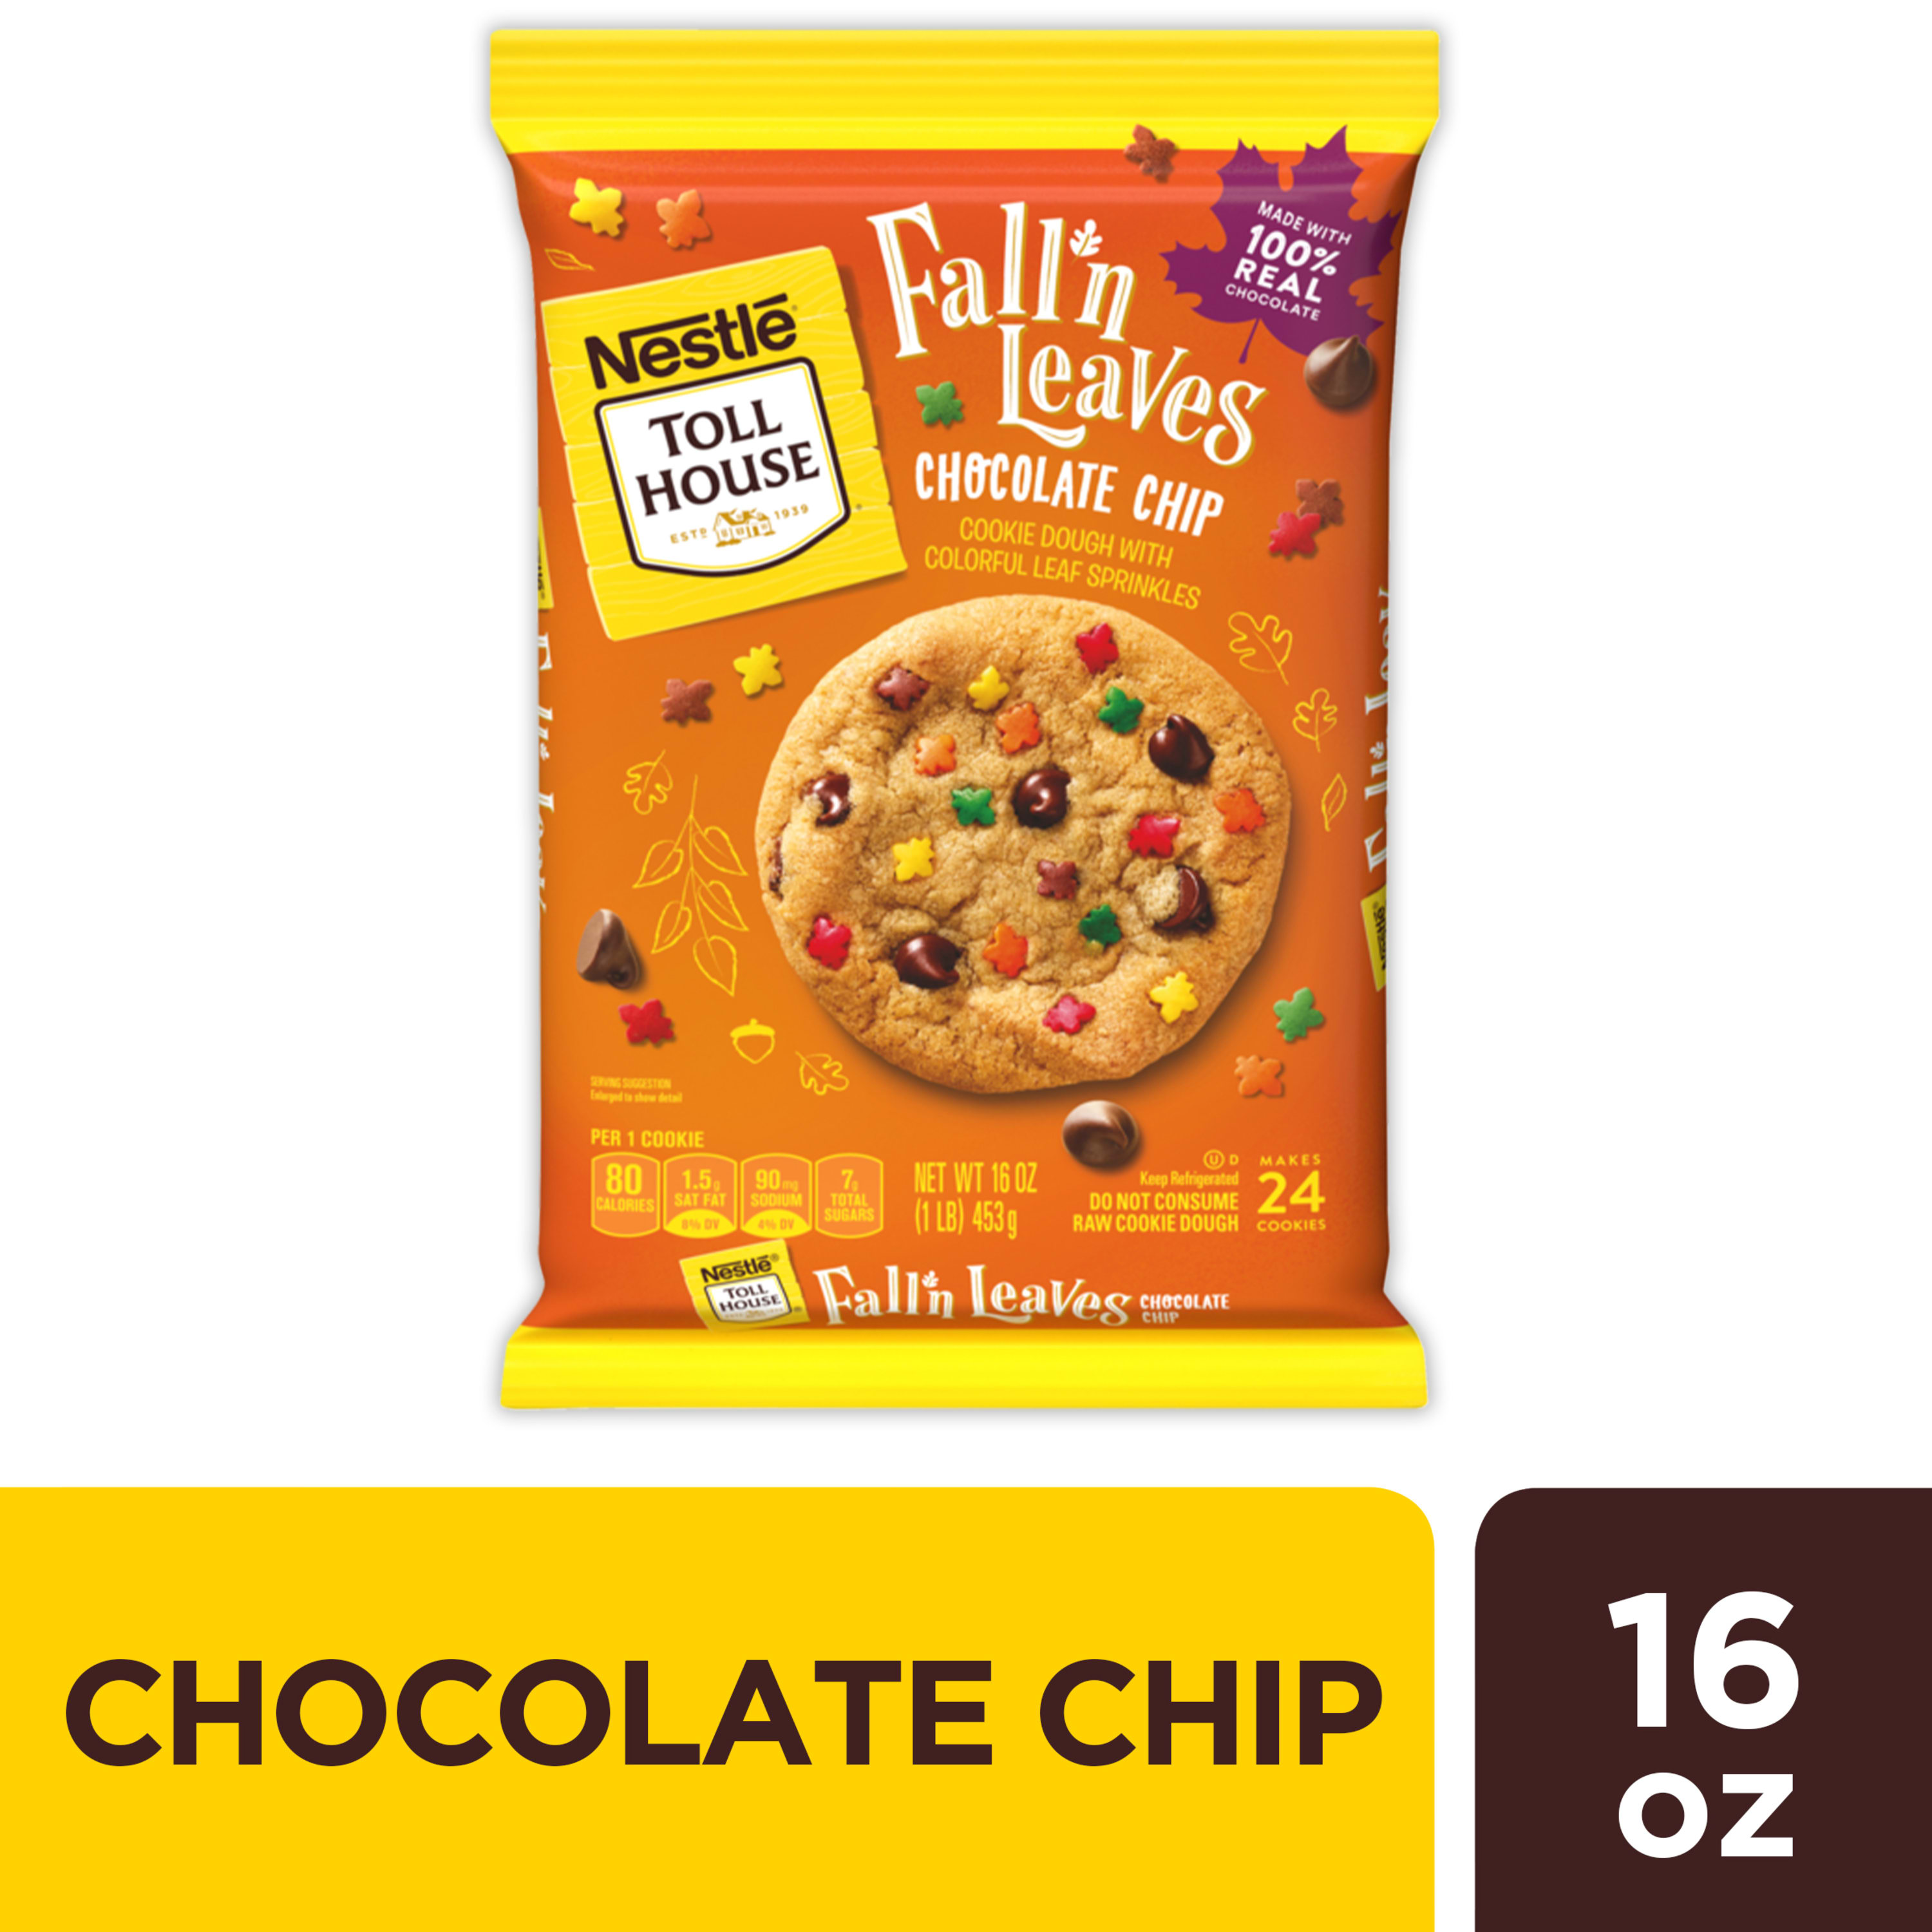 Nestle Toll House Fall'n Leaves Chocolate Chip Cookie Dough 0.999 lb. - image 1 of 10